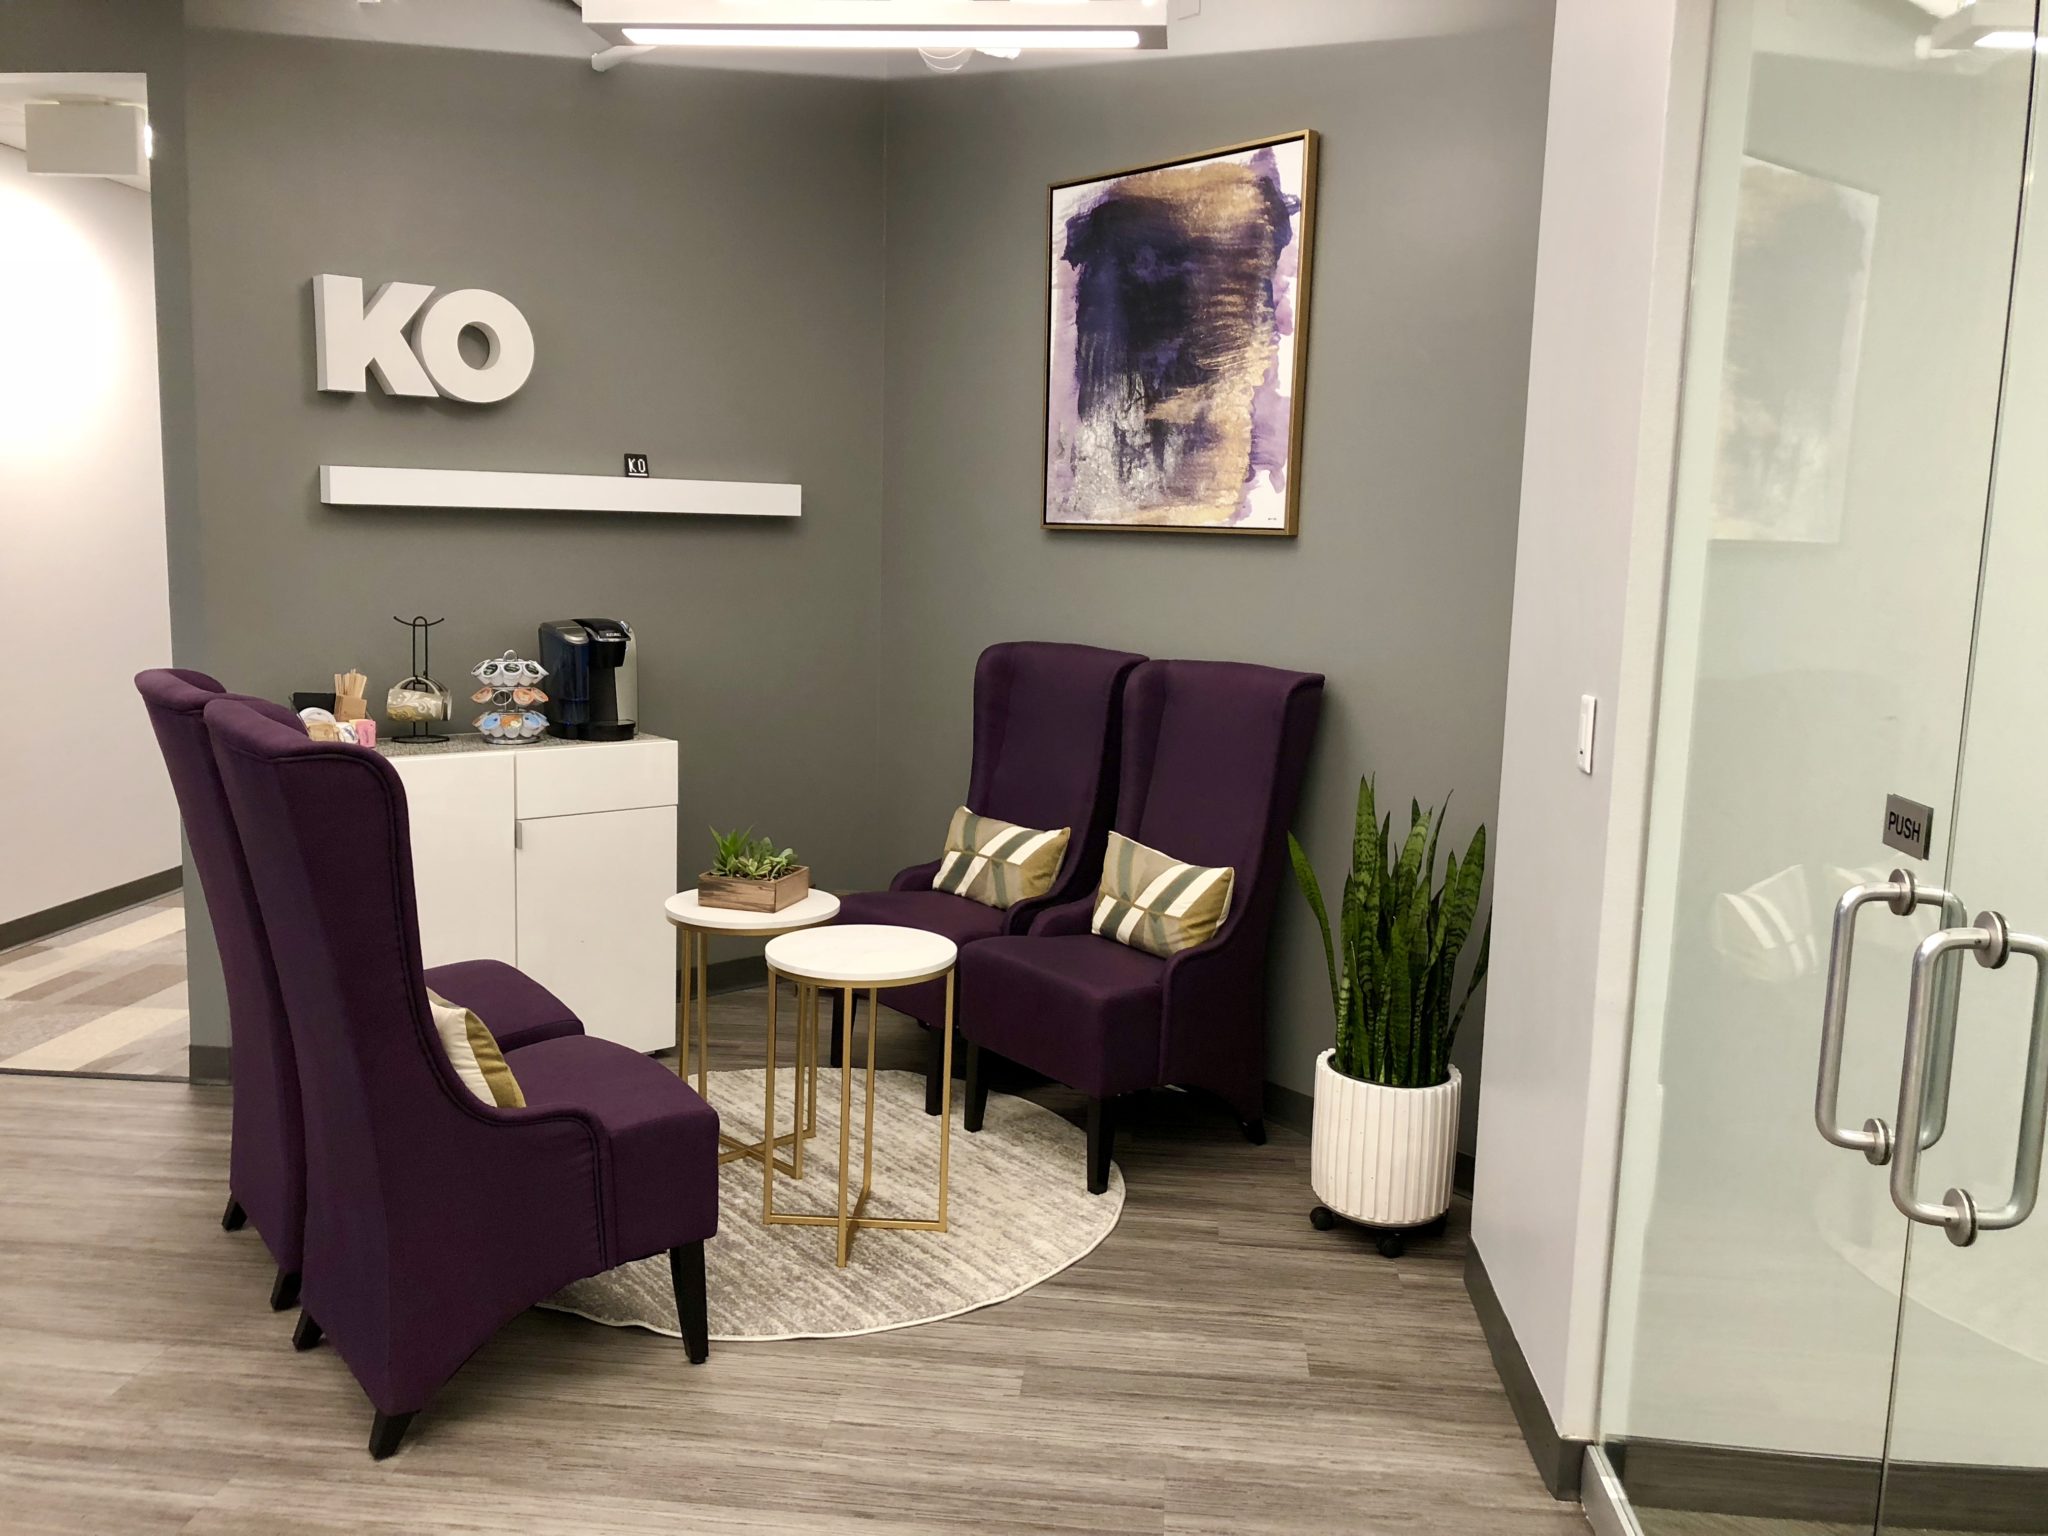 Photo of the KO office